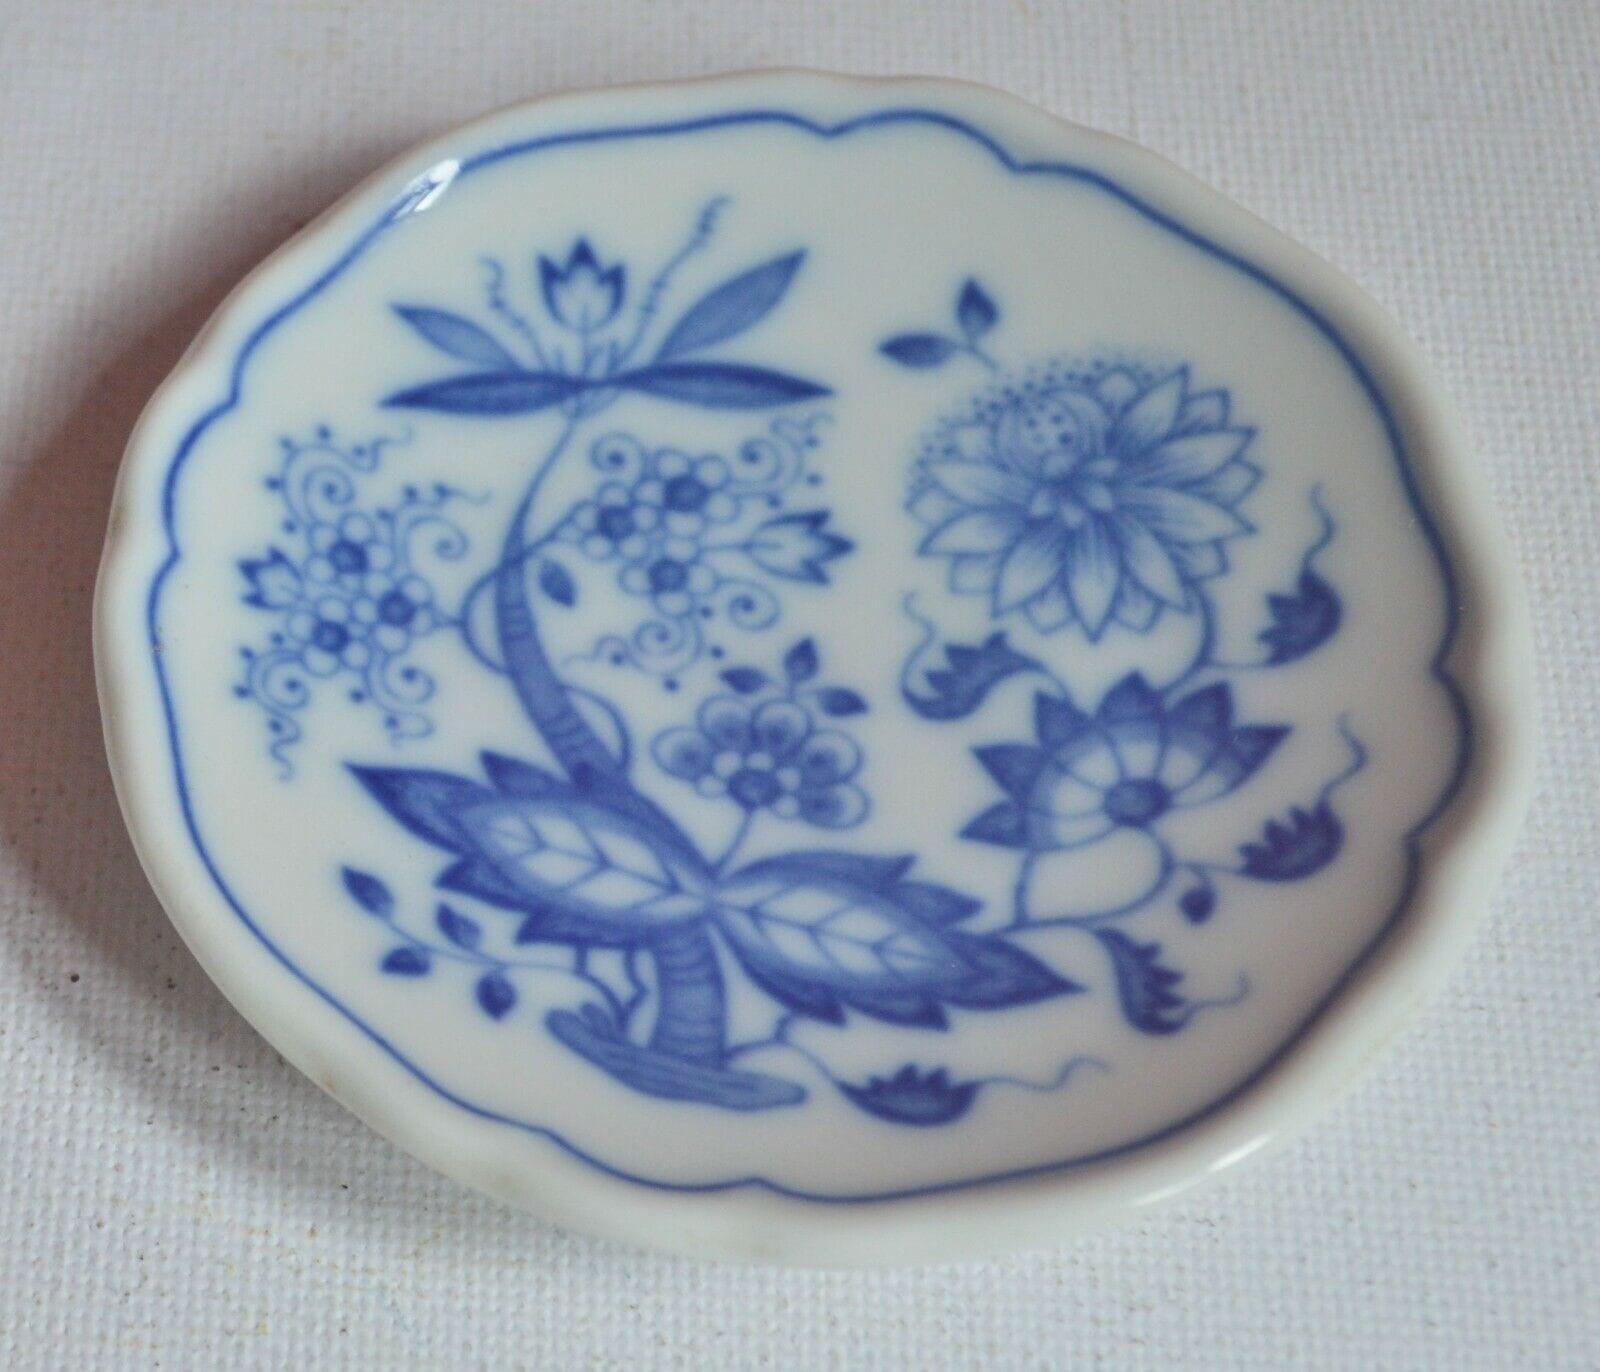 HUTSCHENREUTHER MINIATURE PLATE DEPICTING A BLUE FLORAL PATTERN - TMD167207